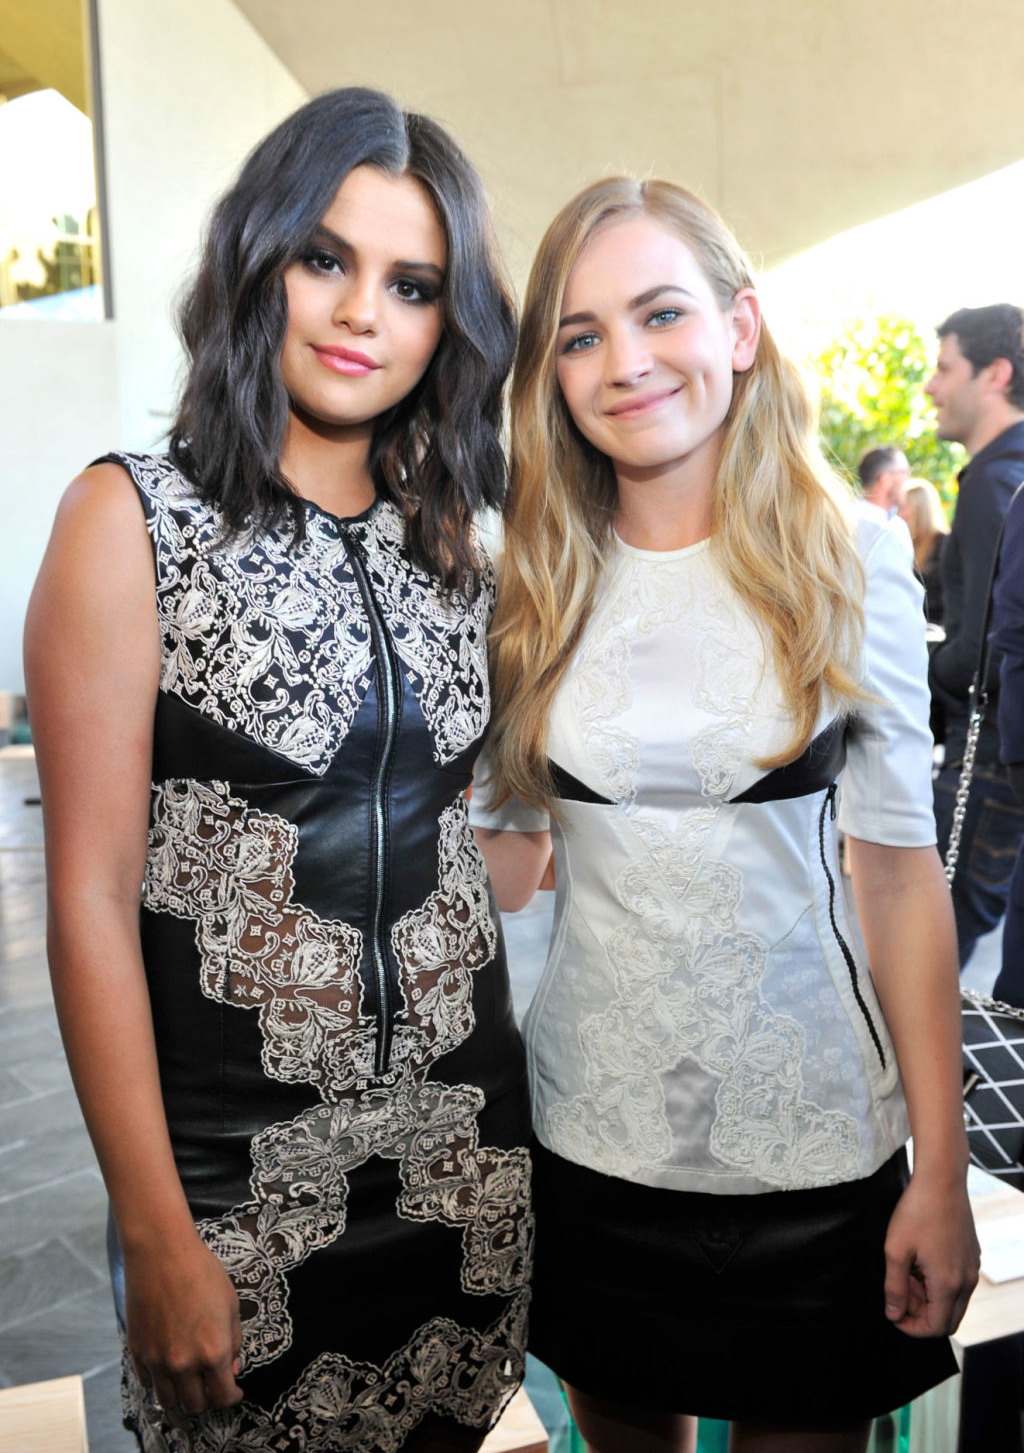 Selena Gomez attends Louis Vuitton Cruise 2016 Resort Collection